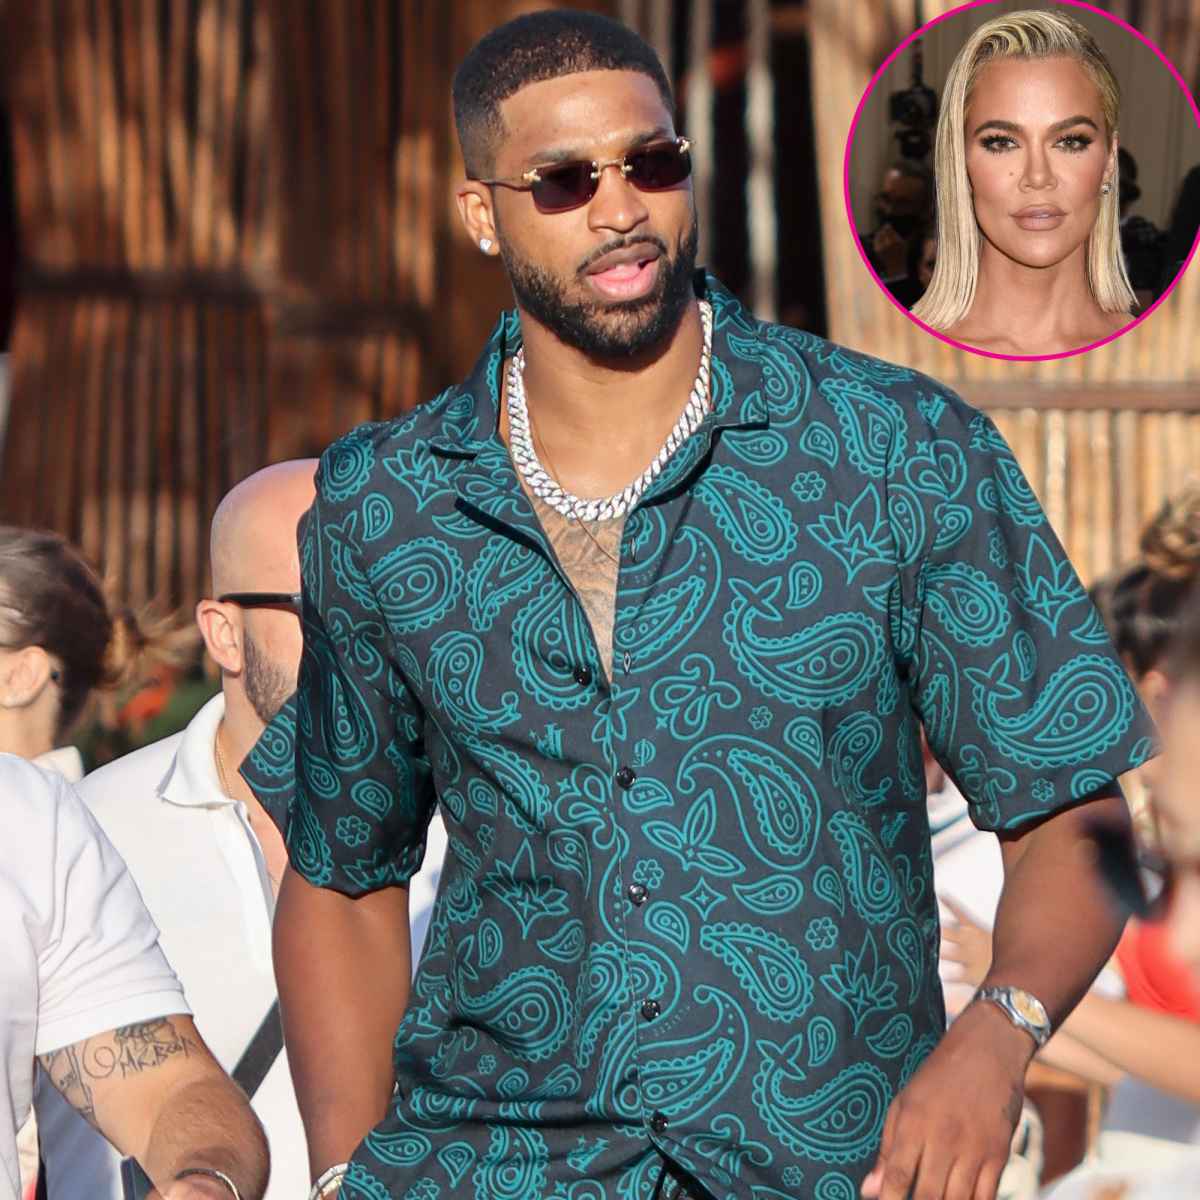 Who Is Tristan Thompson? All About Khloé Kardashian's Baby Daddy